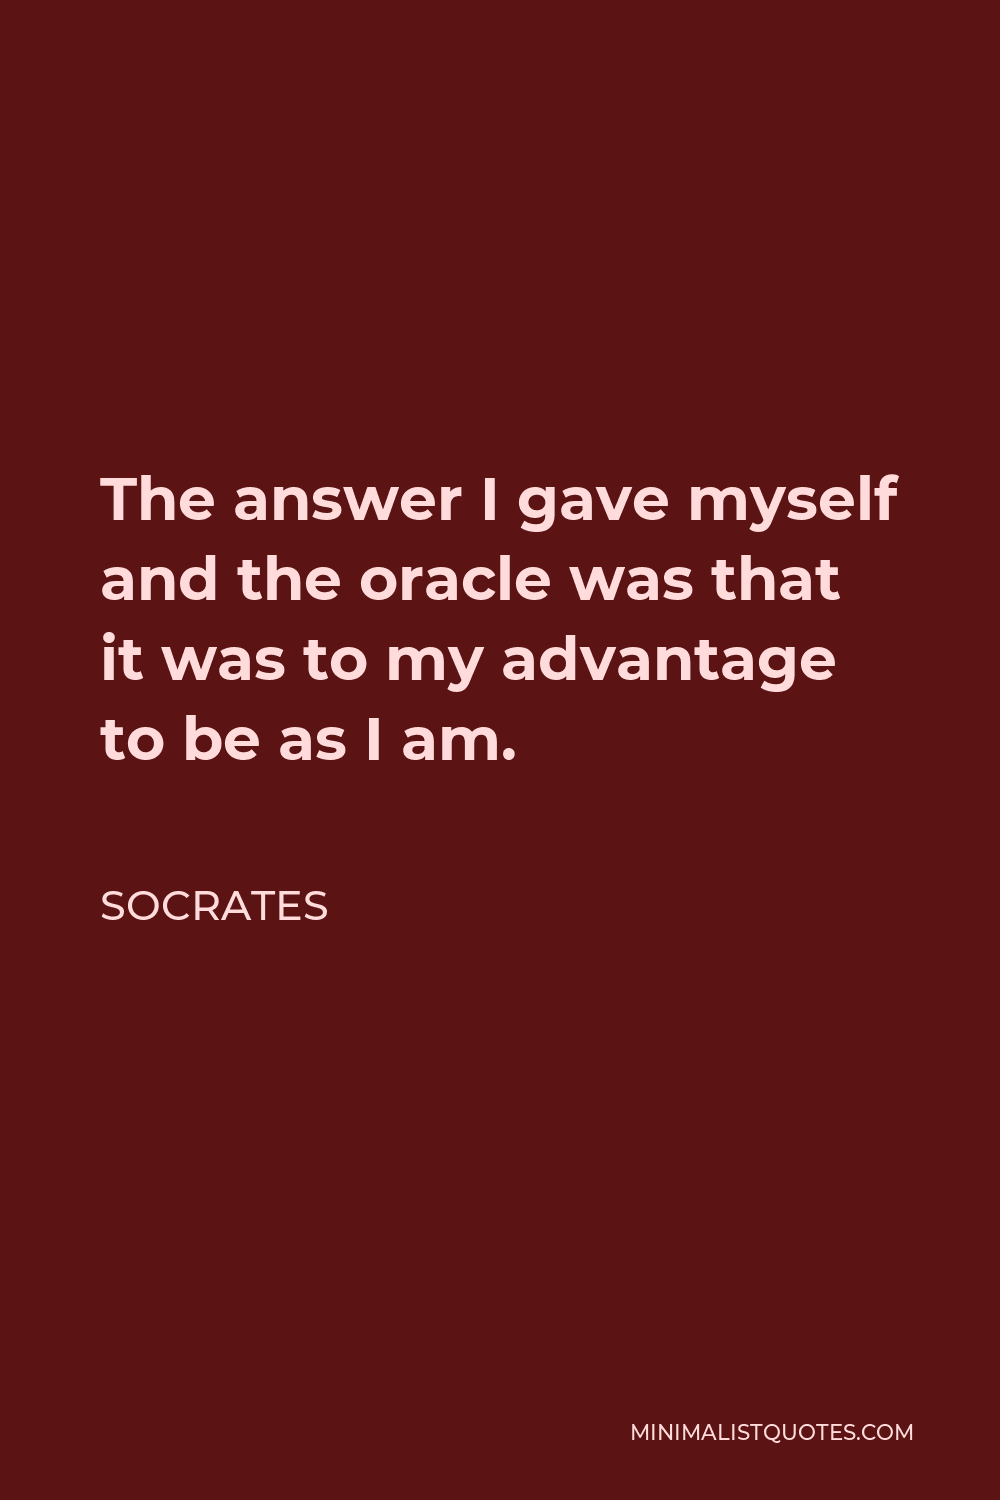 Socrates answer Socrates and